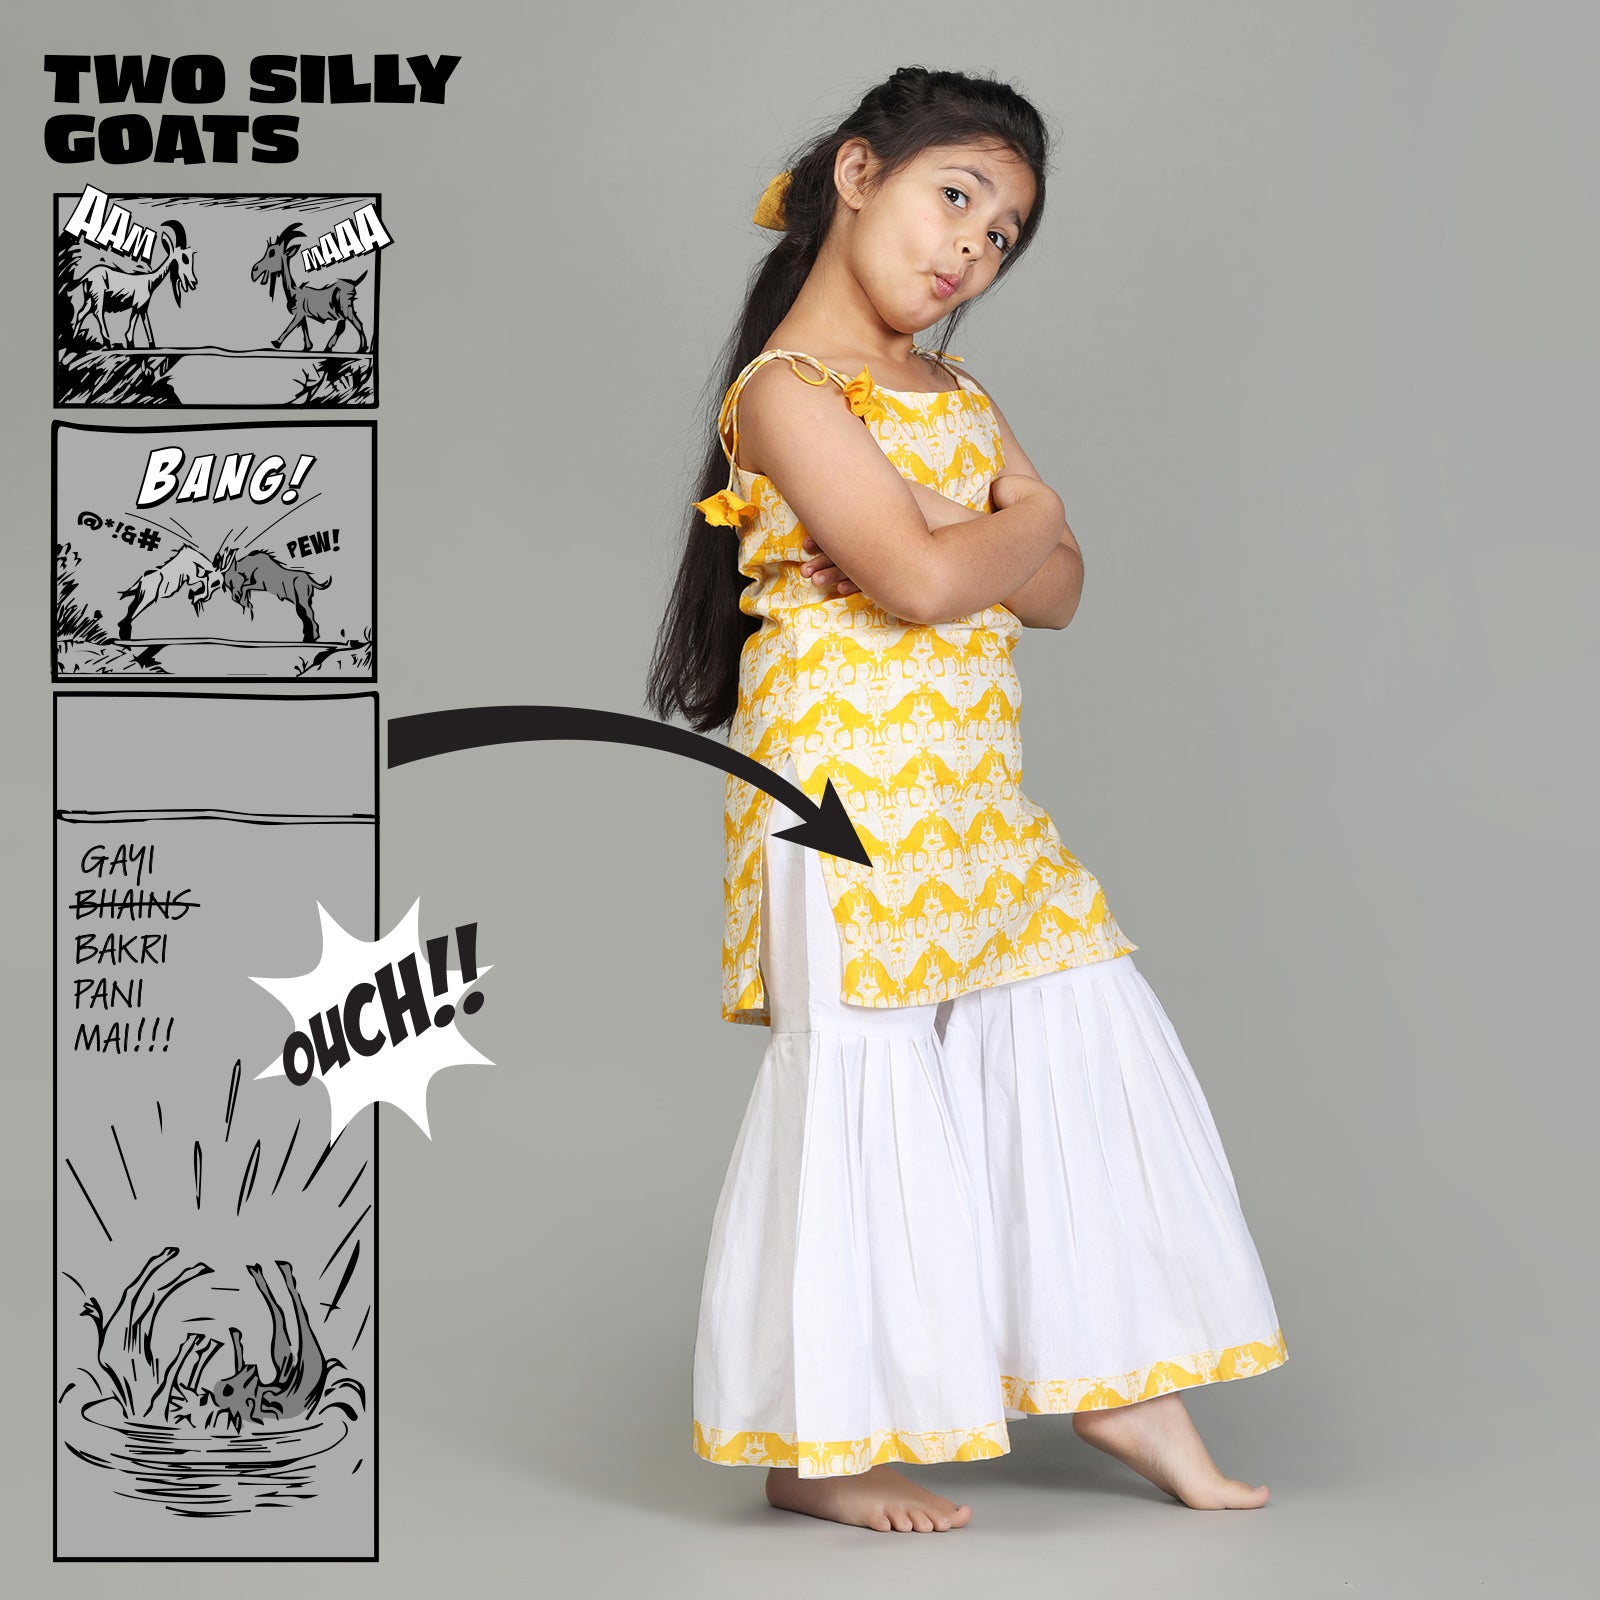 Cotton Kurta & Sharara Set For Girls with Two Silly Goats Print